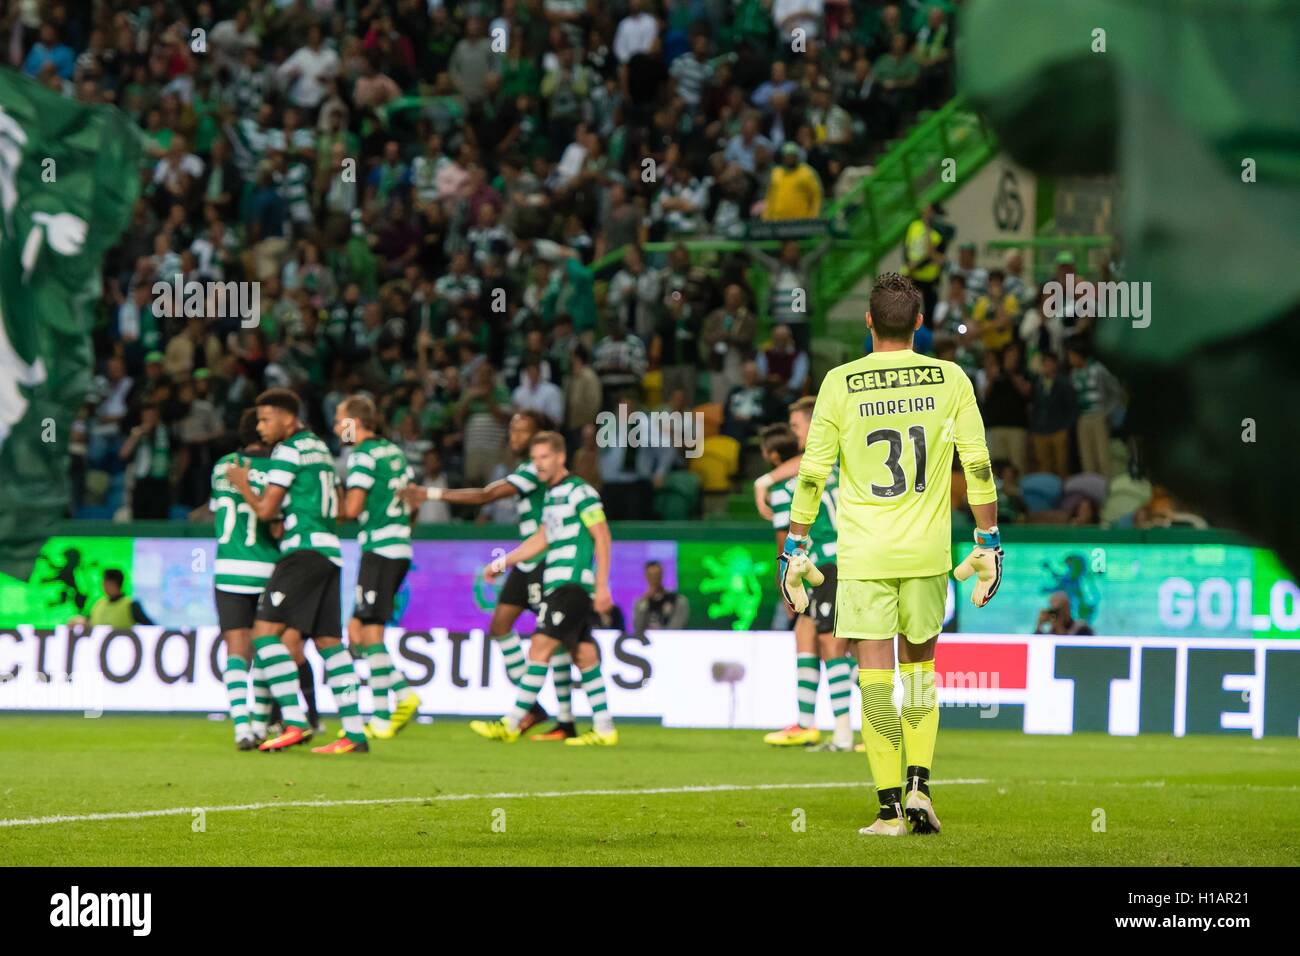 Portugal, Lisbon, Sep. 23, 2016 - PORTUGUESE FOOTBALL - Moreira (R) in action during Portuguese First League match between Sporting and Estoril at Alvalade XXI Stadium, in Lisbon, Portugal. Credit:  Bruno de Carvalho/Alamy Live News Stock Photo